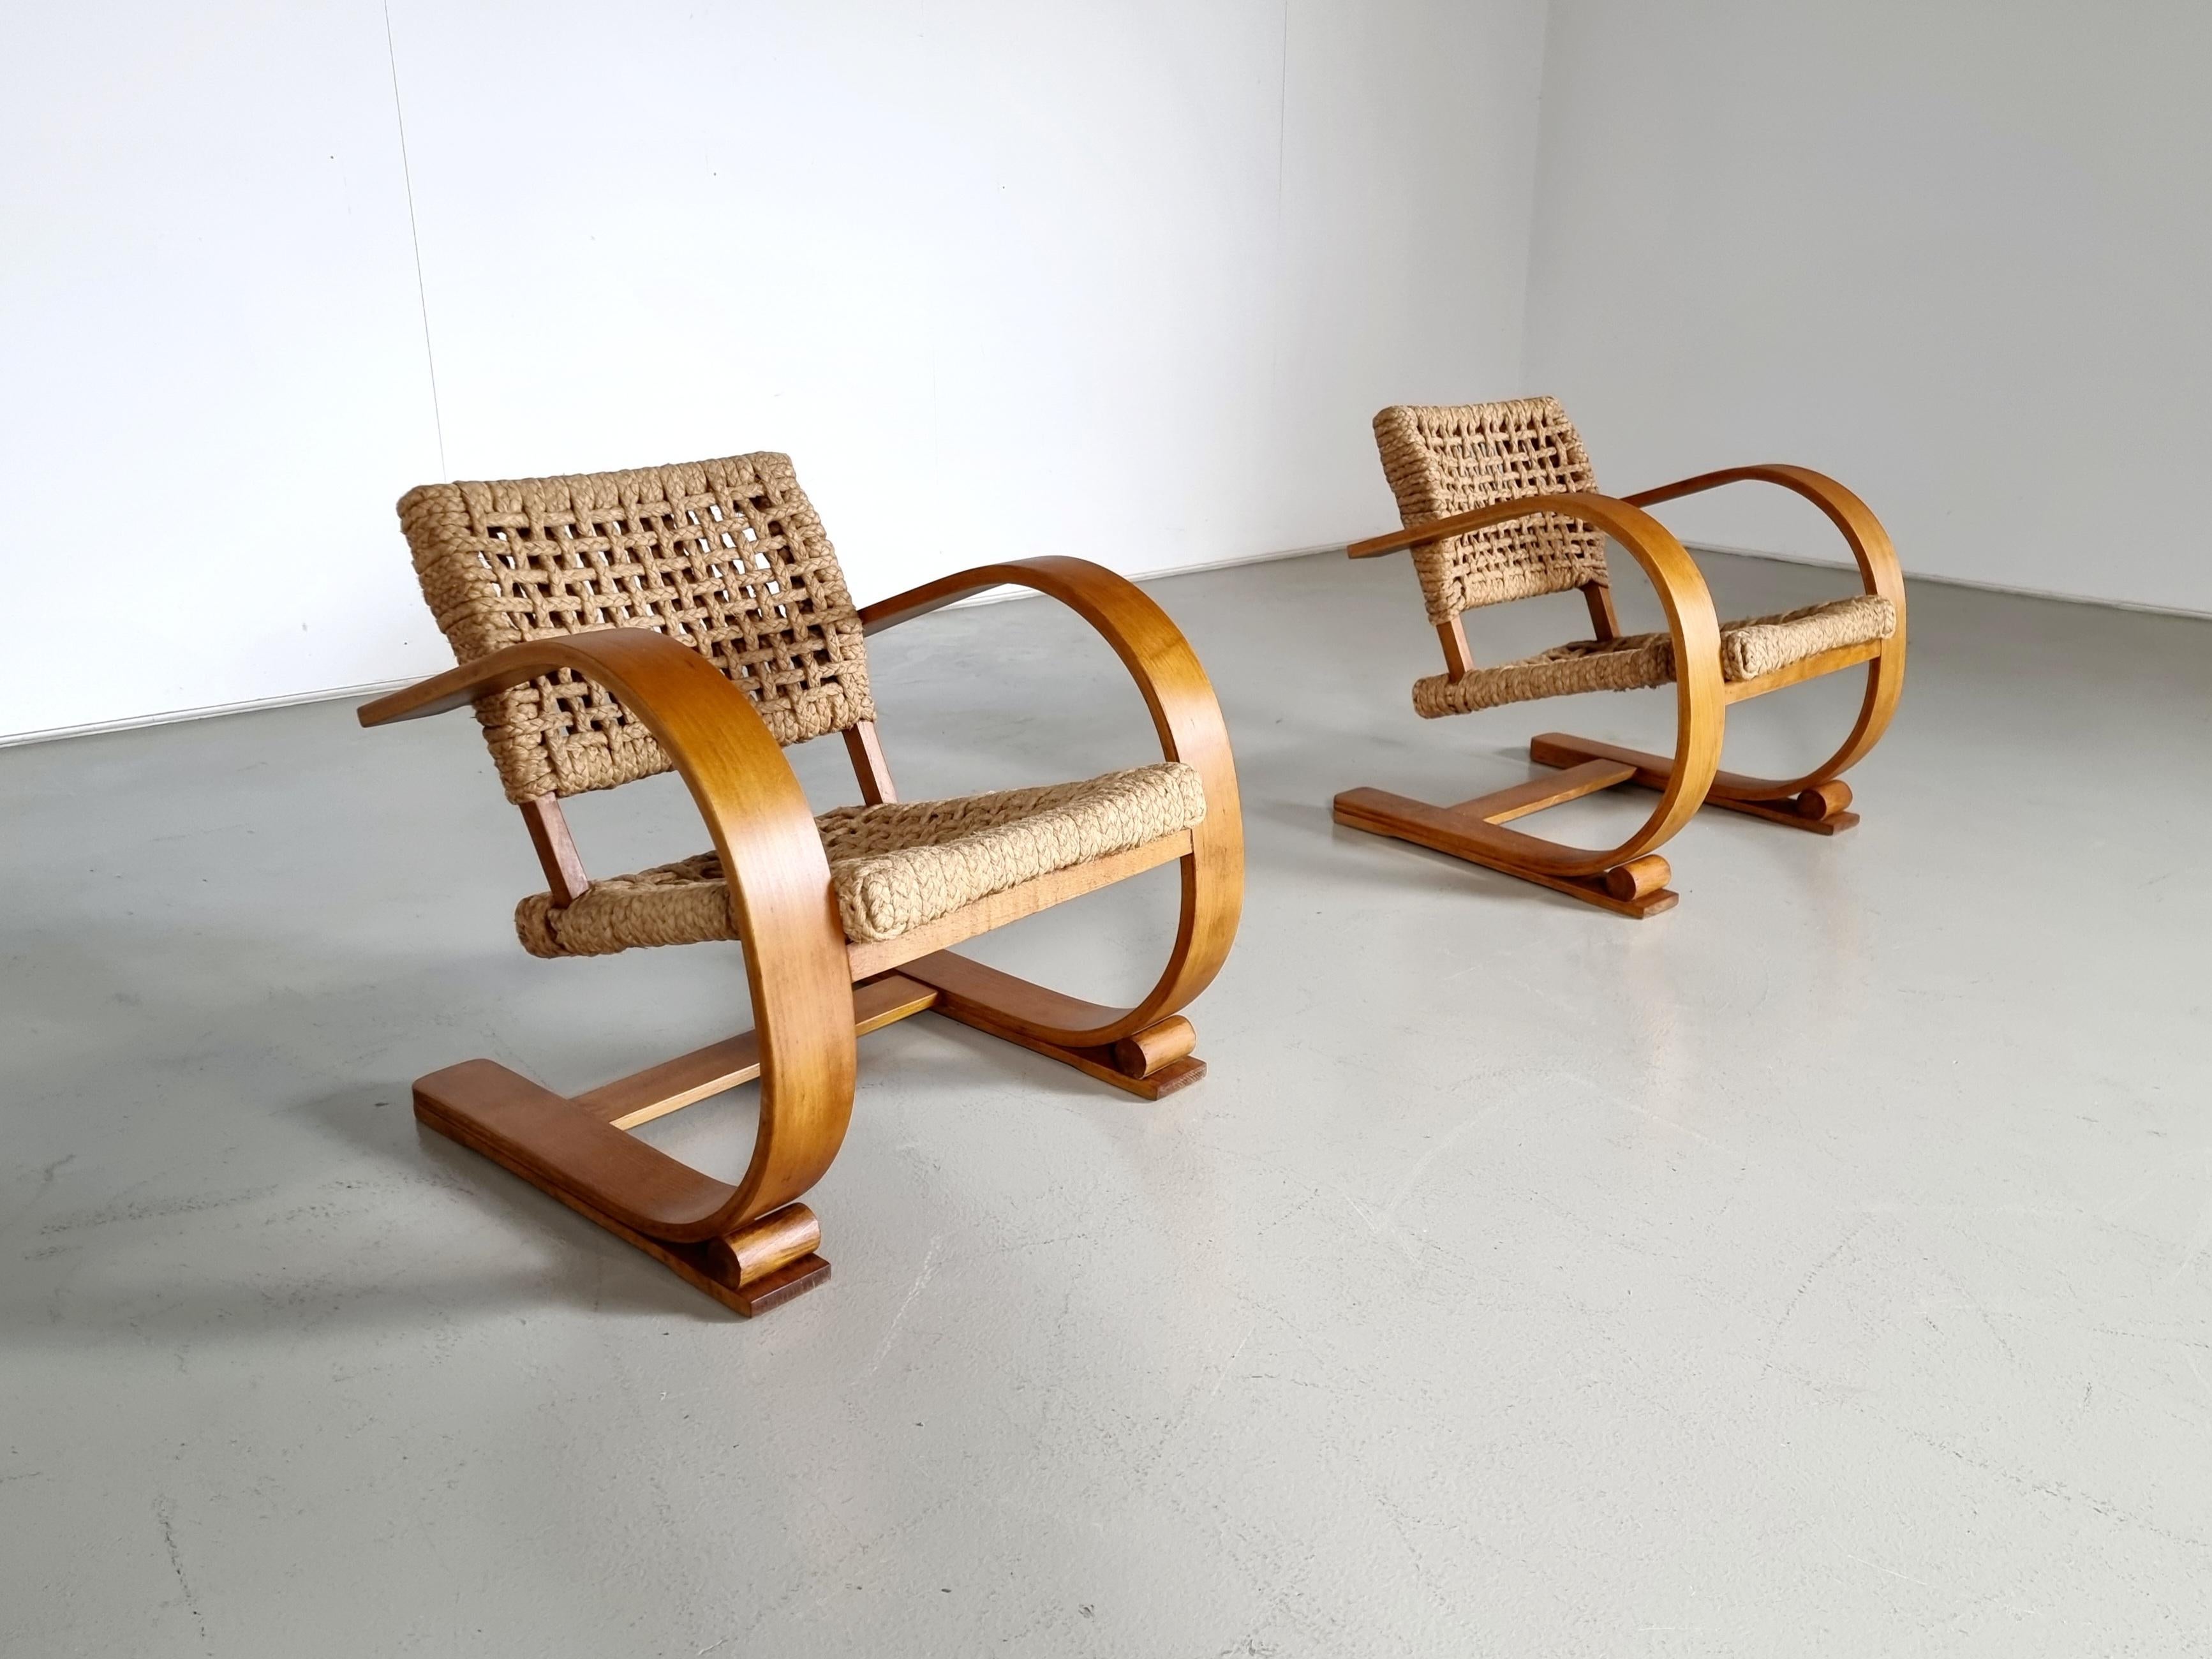 Adrien Audoux and Frida Minet for Vibo, France. A French couple of modernist designers that has been very productive during the 1940s and 1950s. 
These chairs are made in the 1940s. The frame of bentwood, braided rope seats, and backrests. Stamp